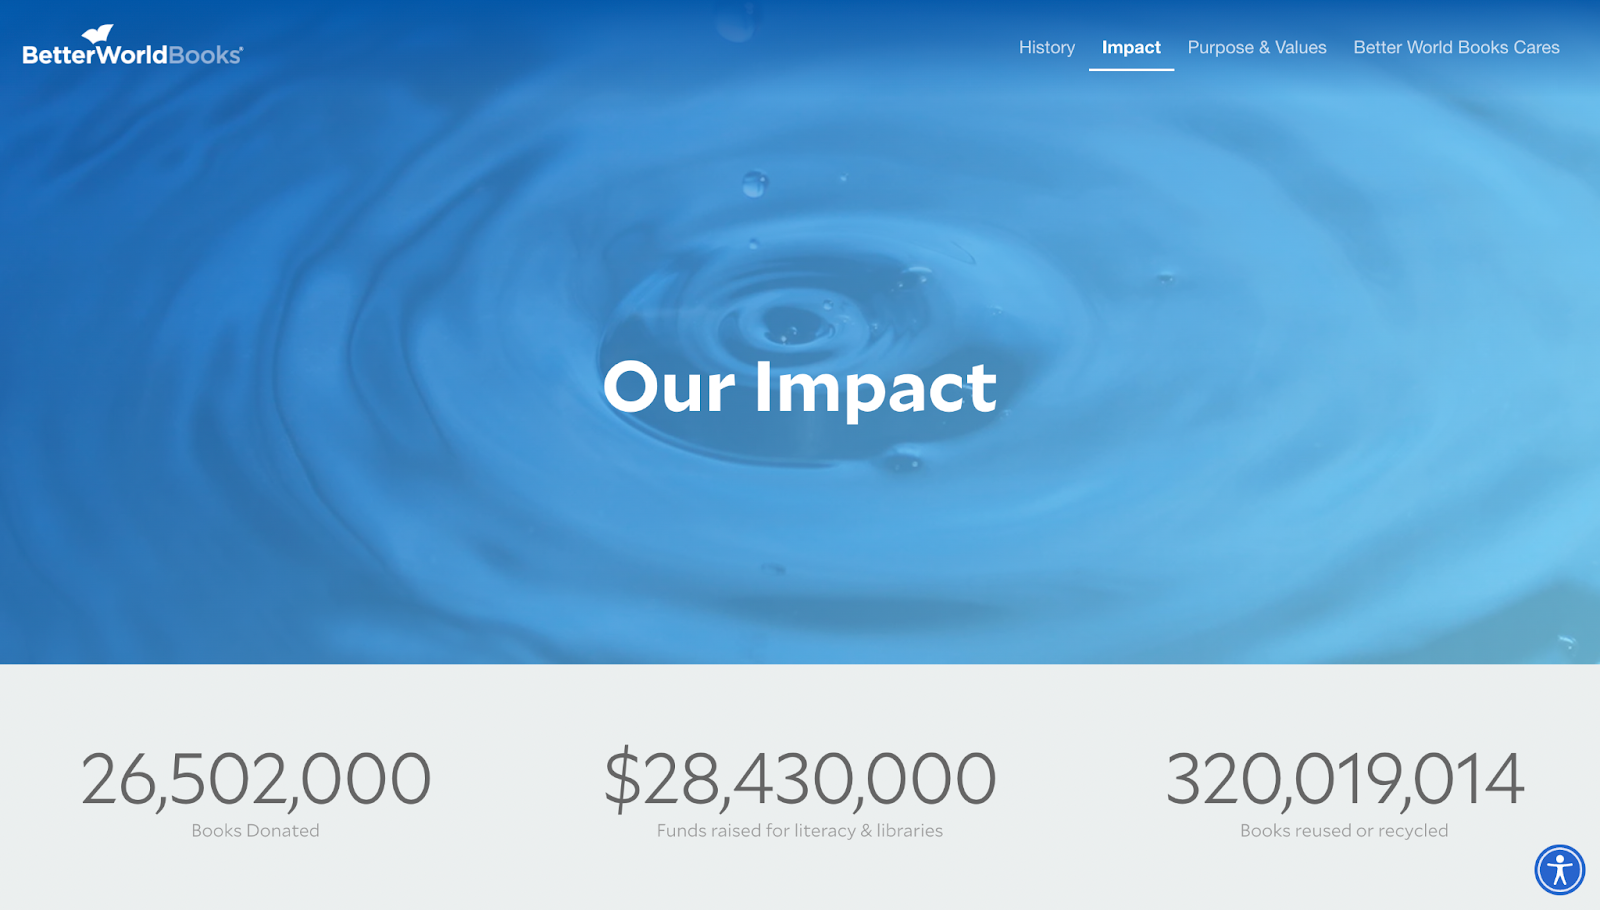 Better World Books’ Impact page showing 26,502,000 books donated, $28,430,000 funds raised for literacy and libraries, and 320,019,014 books reused or recycled–How to find a hobby